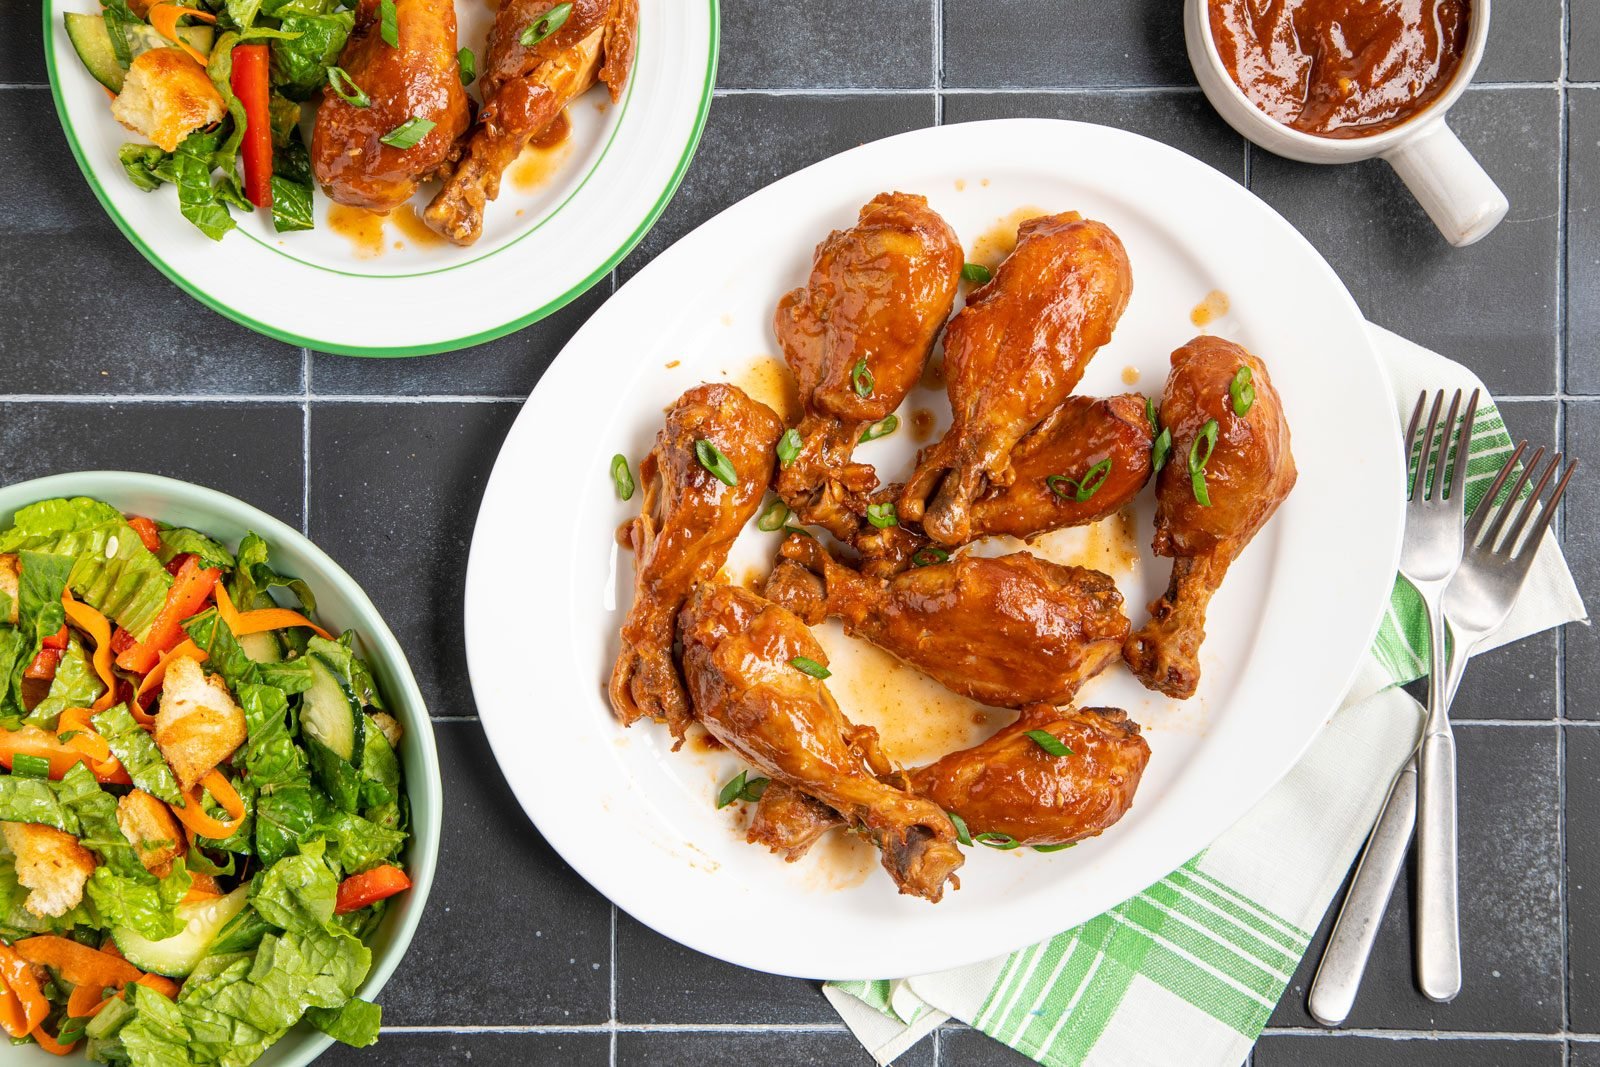 How To Make Slow Cooker Chicken Legs